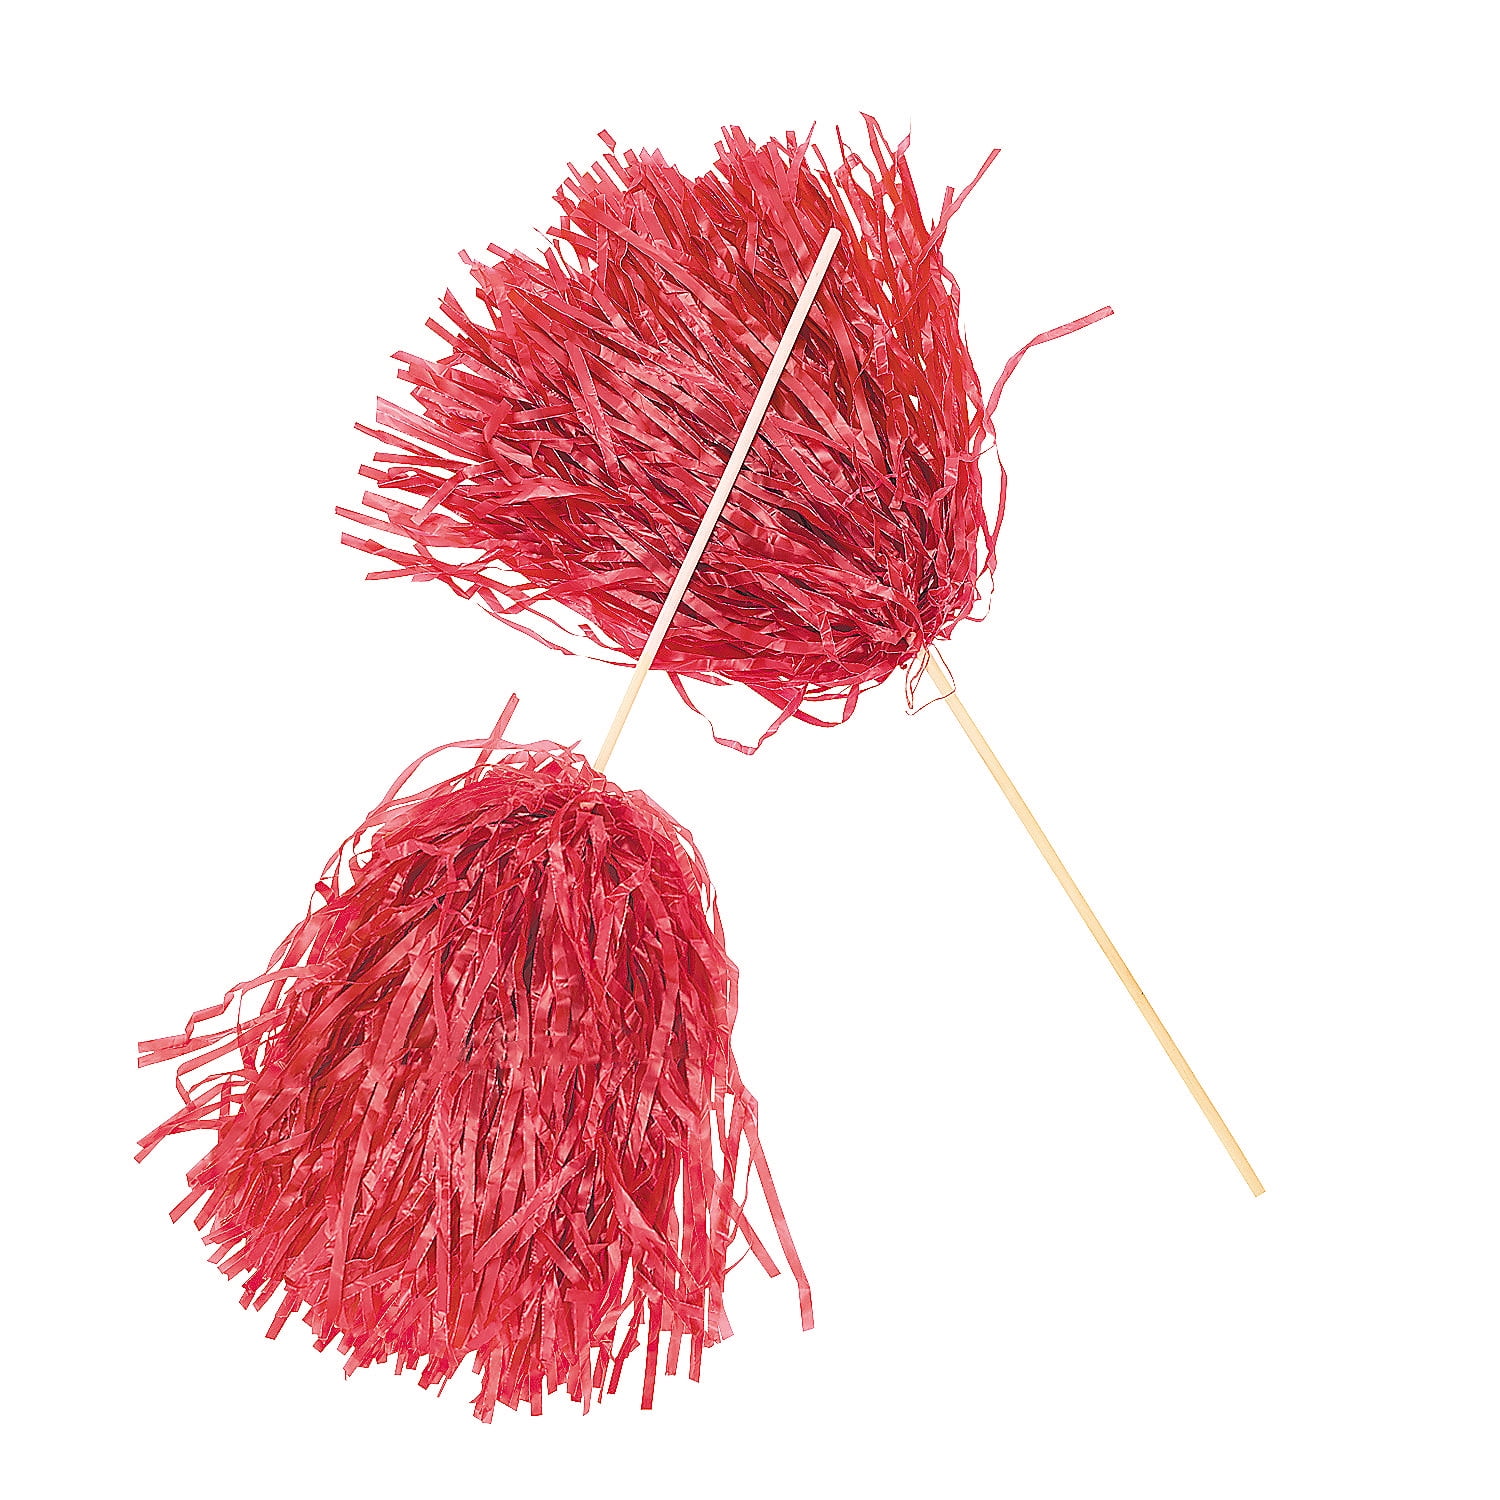 Pllieay 30 Pcs 2.4 Inch Very Large Assorted Pom Poms for Arts and